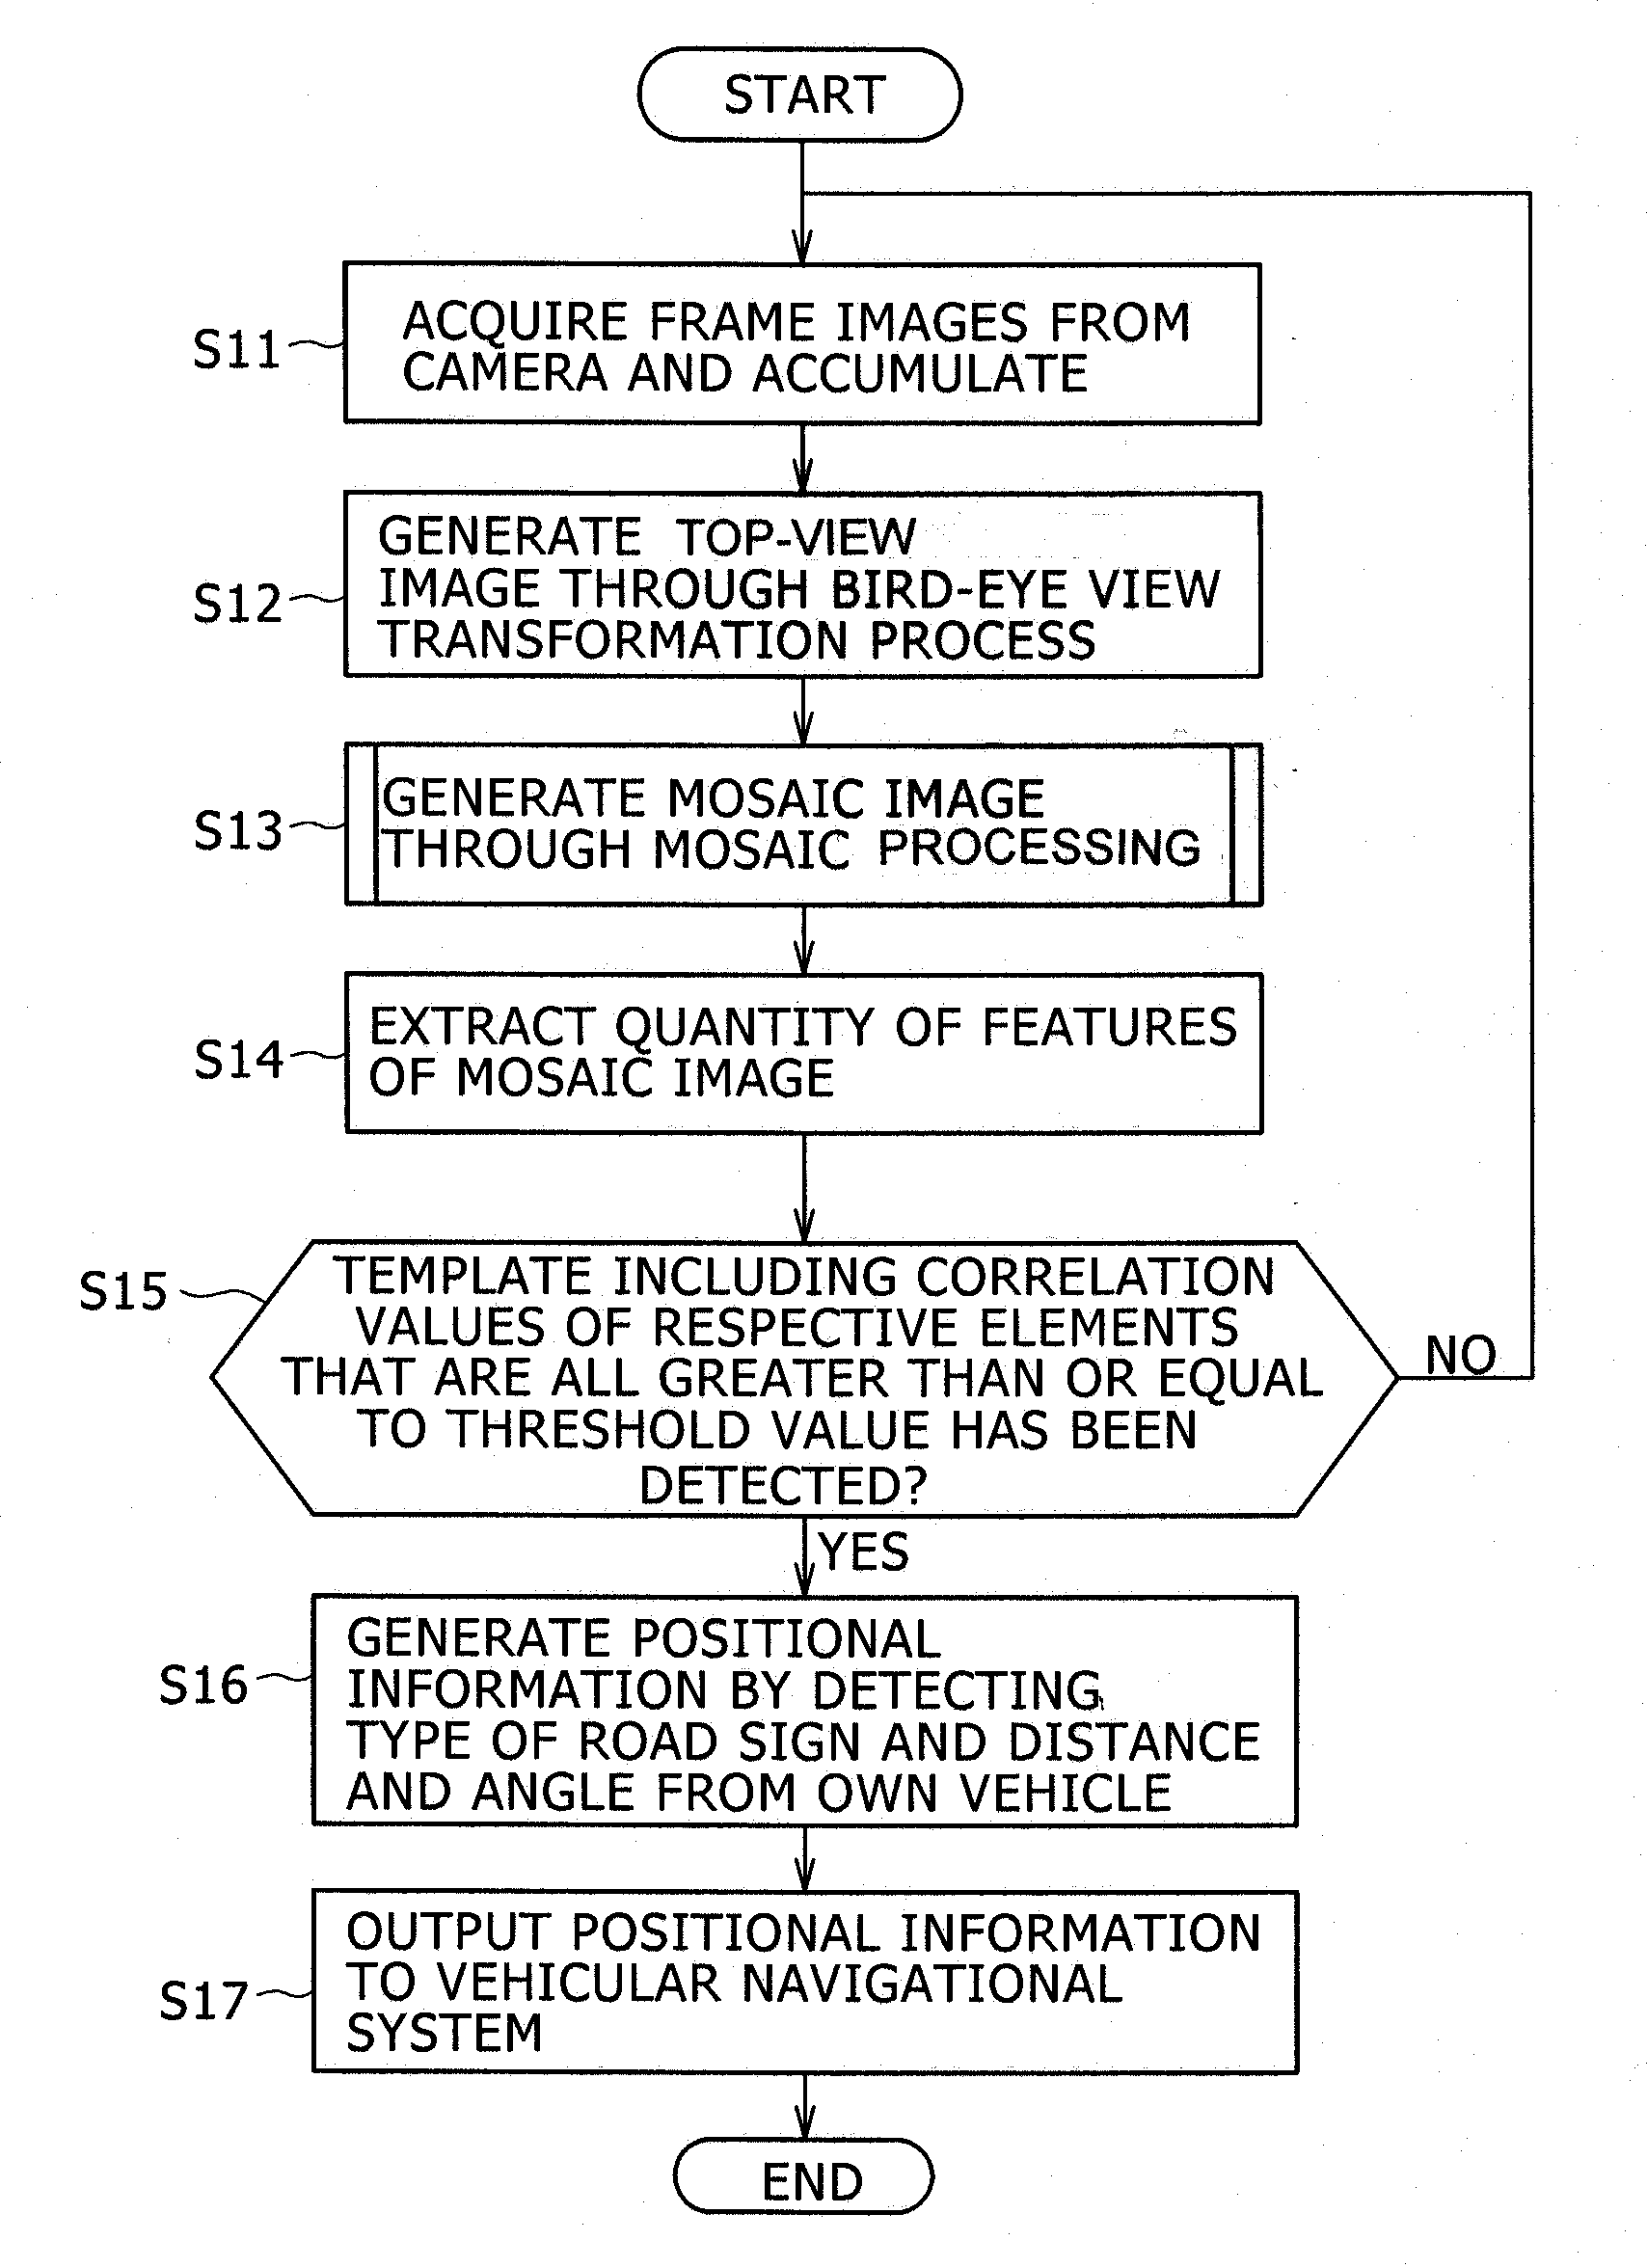 Load Sign Recognition Apparatus and Load Sign Recognition Method